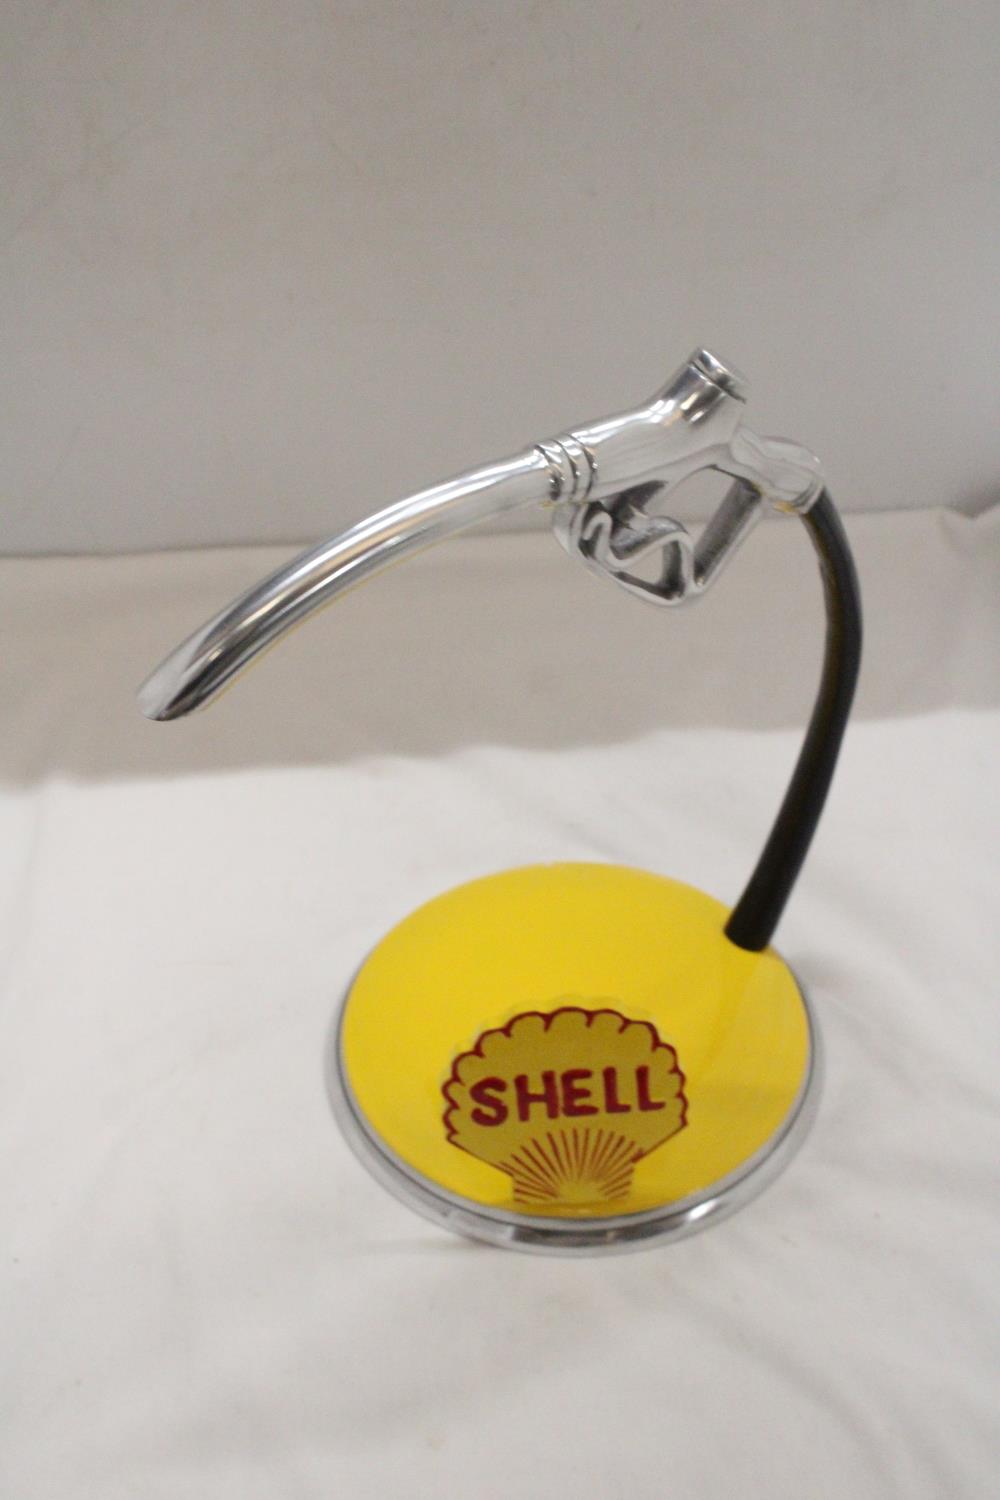 A CHROME AND YELLOW SHELL PETROL PUMP HANDLE, HEIGHT 33CM